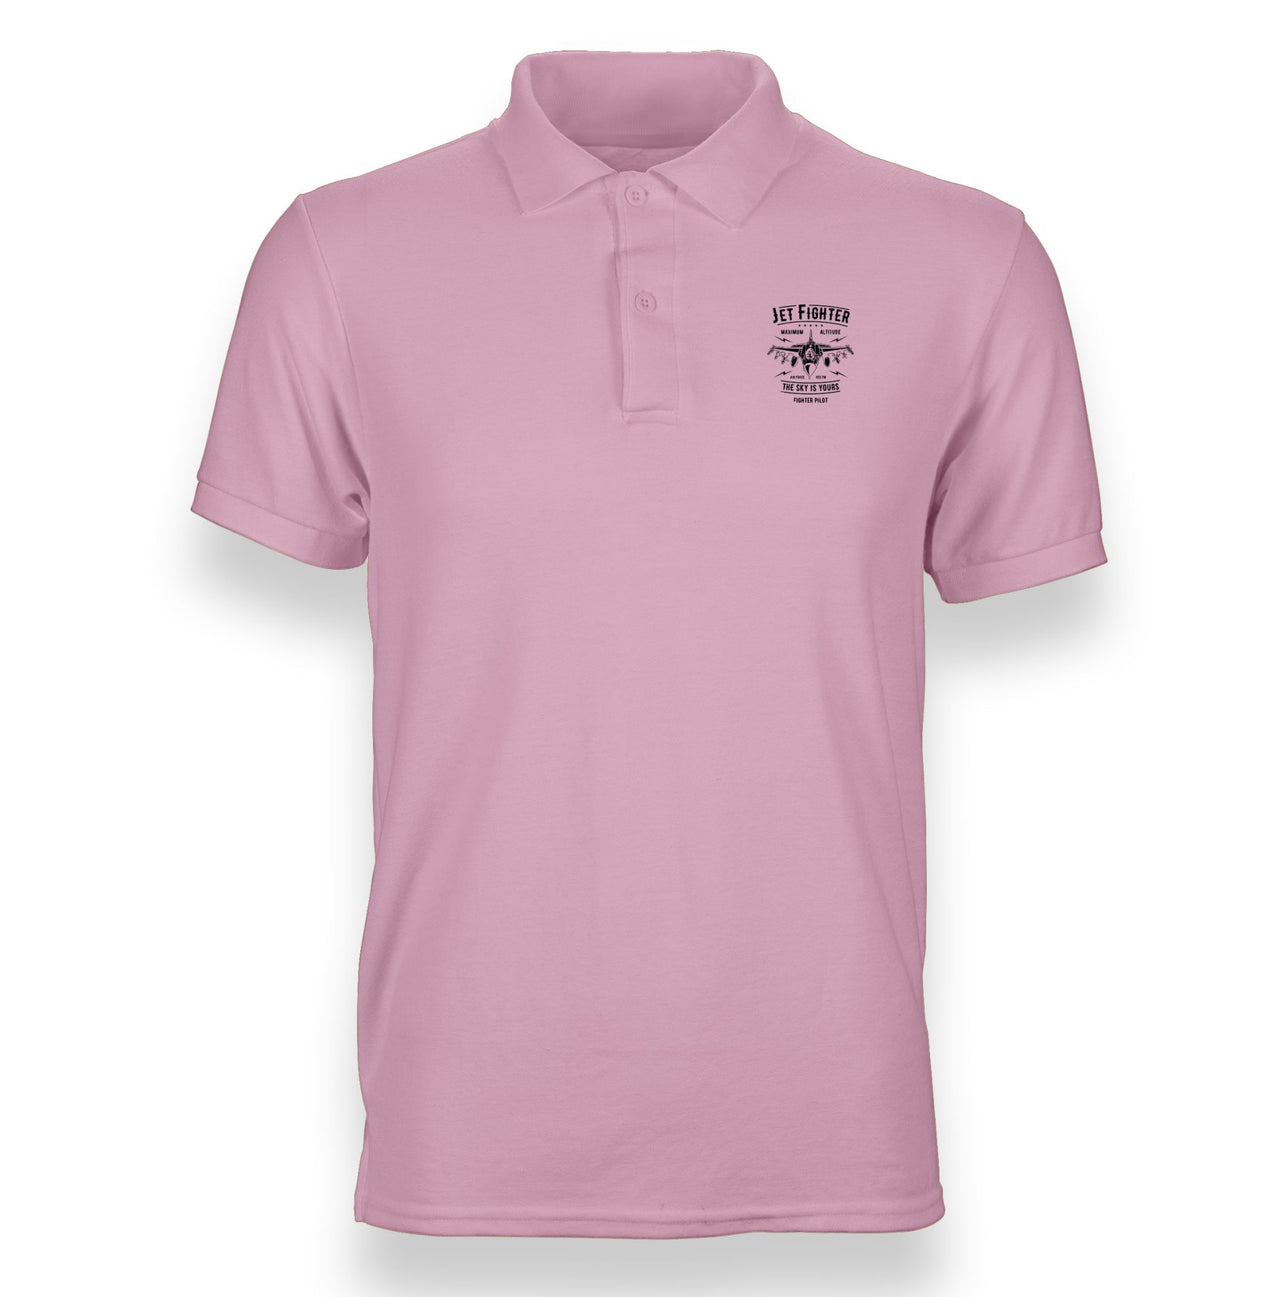 Jet Fighter - The Sky is Yours Designed "WOMEN" Polo T-Shirts